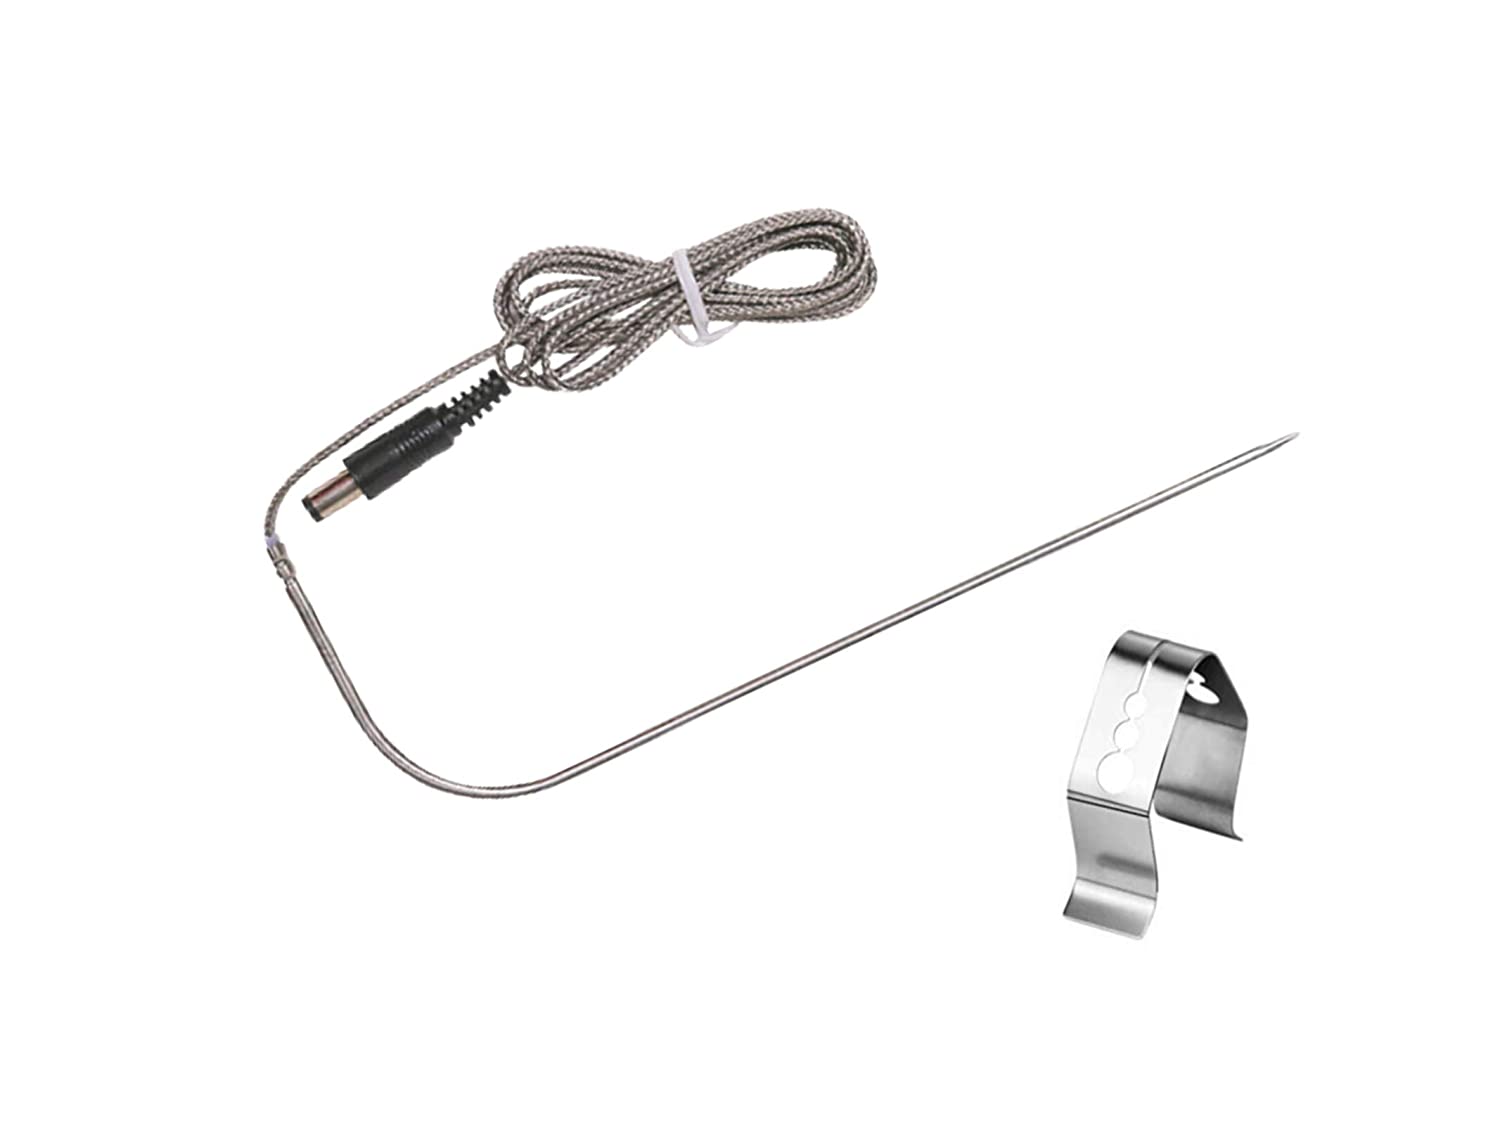 BBQ Grill Temperature Meat Probe with Clips Replacement for Rec Tec Wood Pellet Grill and Smoker (1 x Meat Probe) 